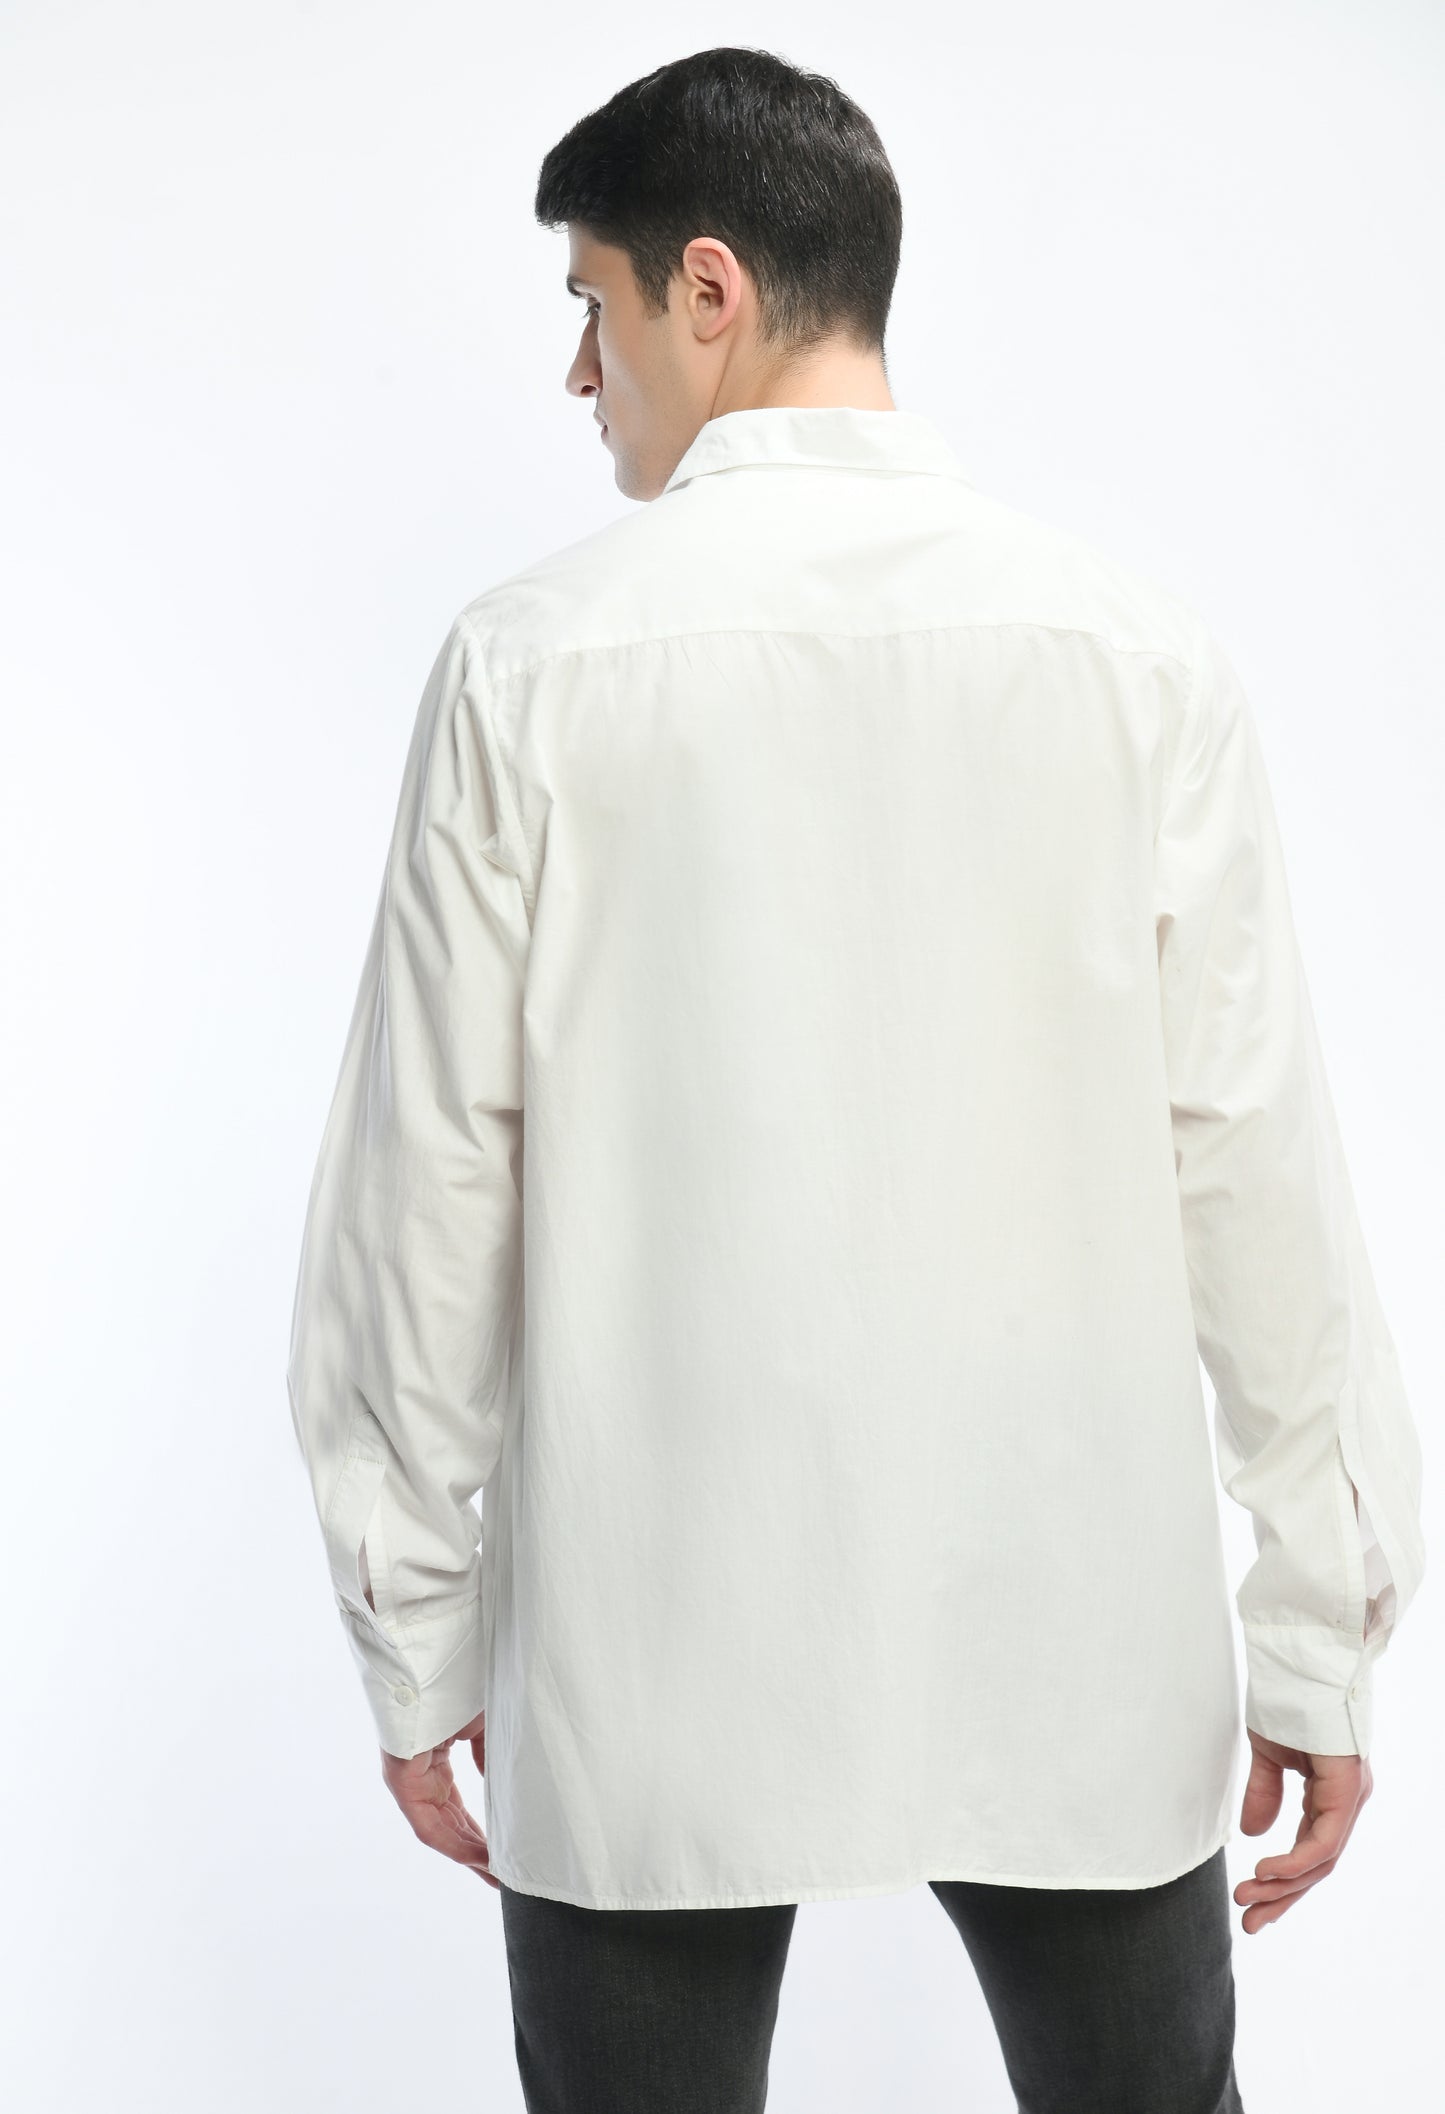 White, stylish, lose-fit, cotton shirt with digital print on it